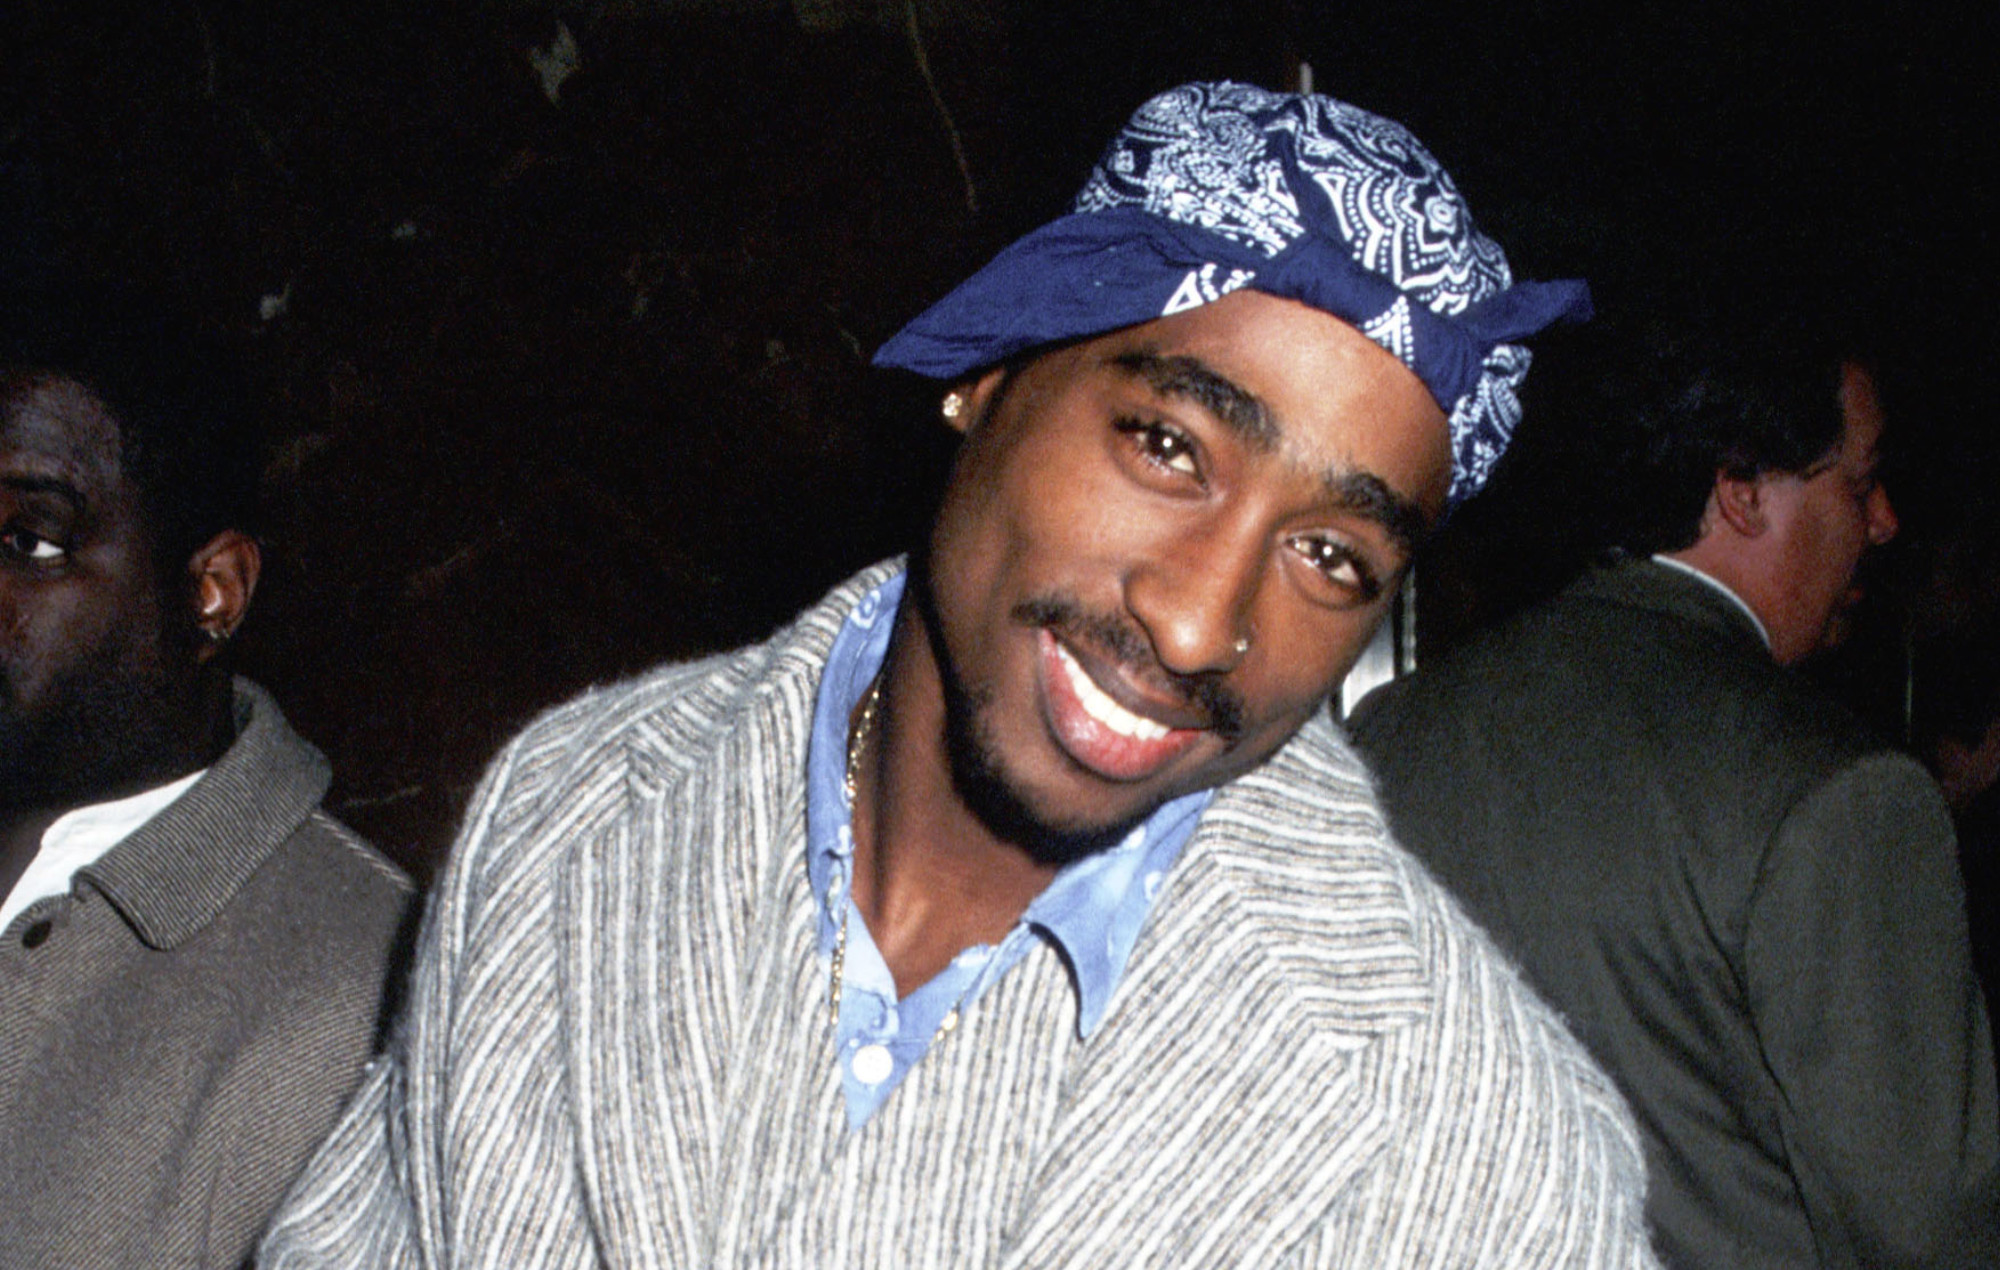 Tupac originally considered signing to Bad Boy Records, says brother